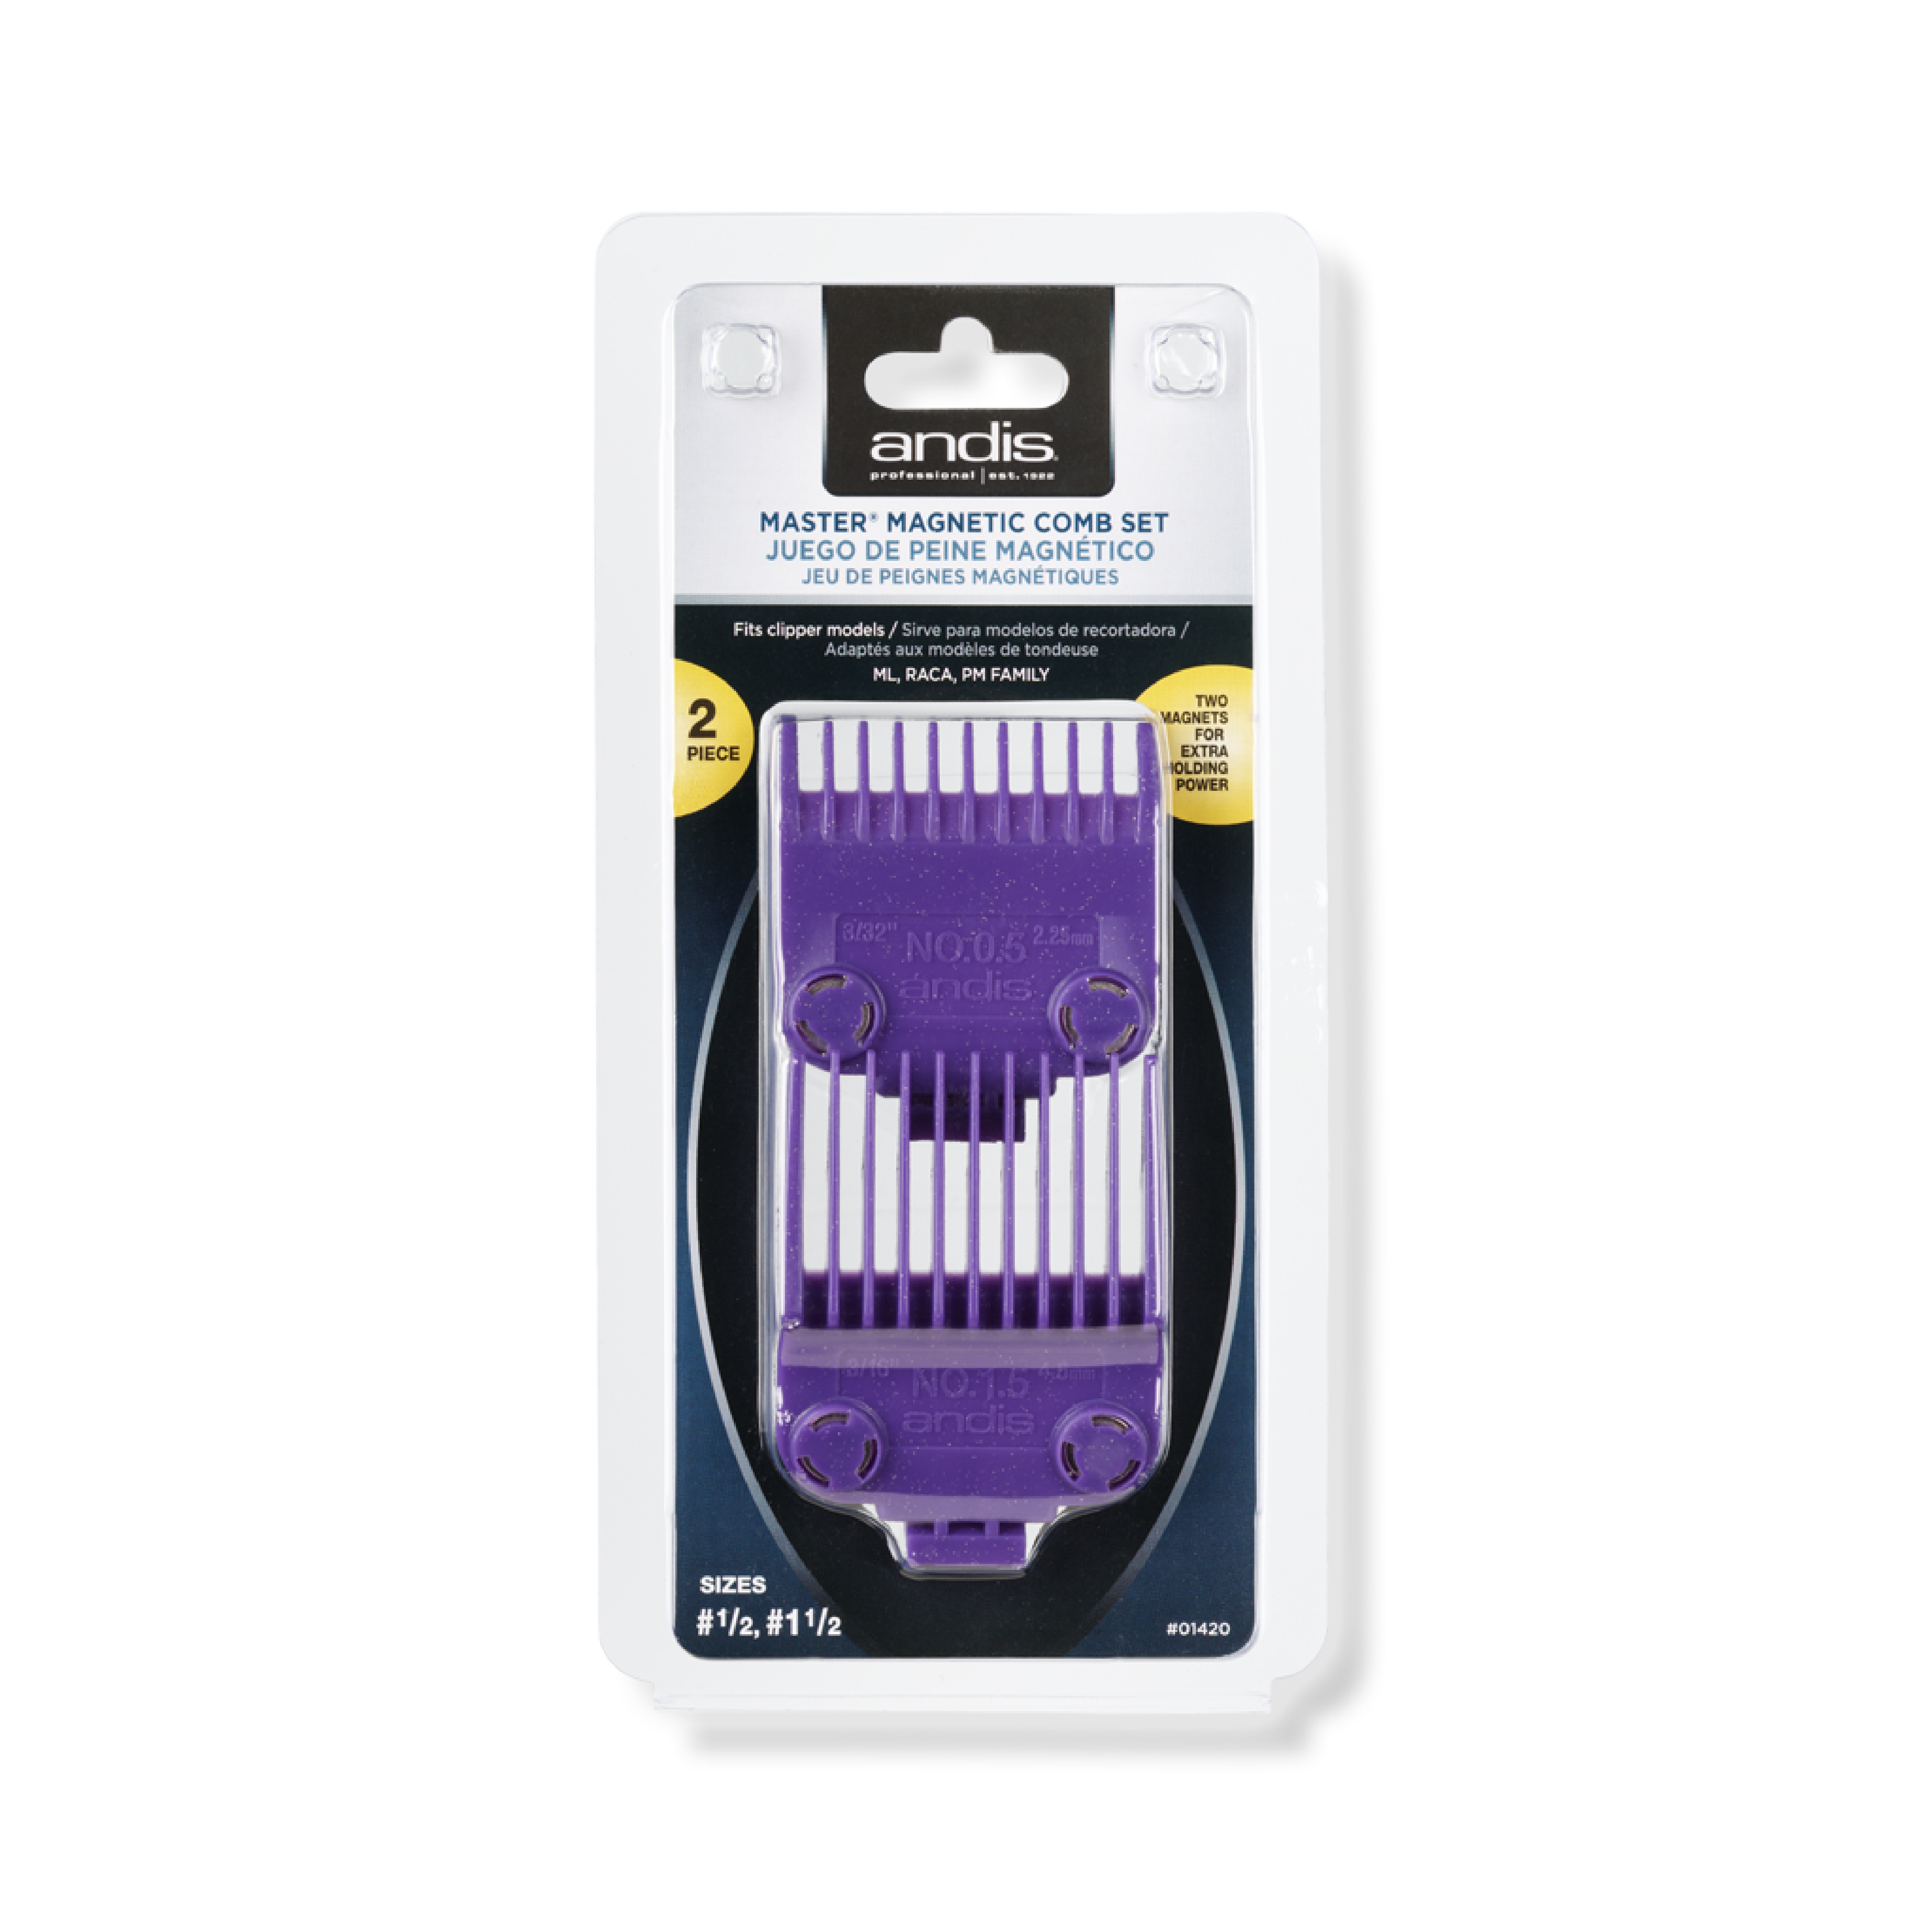 Andis Master Dual Magnetic Comb Set - 01420